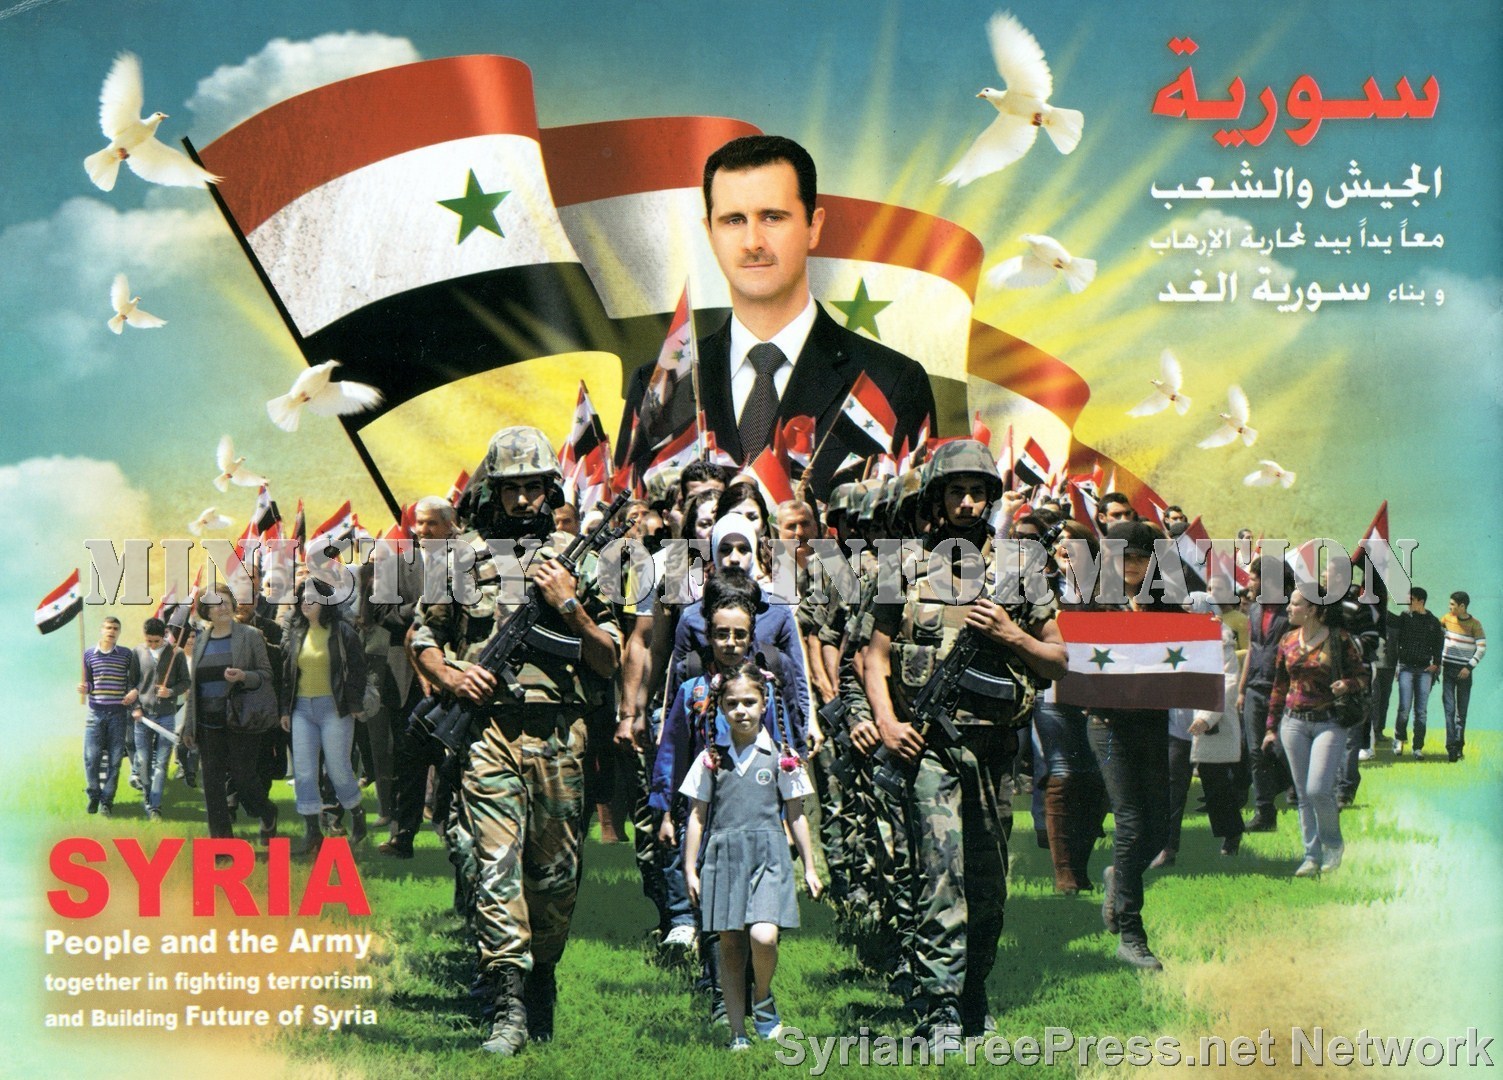 FORGET CEASEFIRE ! WE WILL DESTROY AMERICAN BACKED TERRORISTS ISIS AND AL-NUSRA AS SYRIAN ARMY IS BACK ON THE OFFENSIVE !